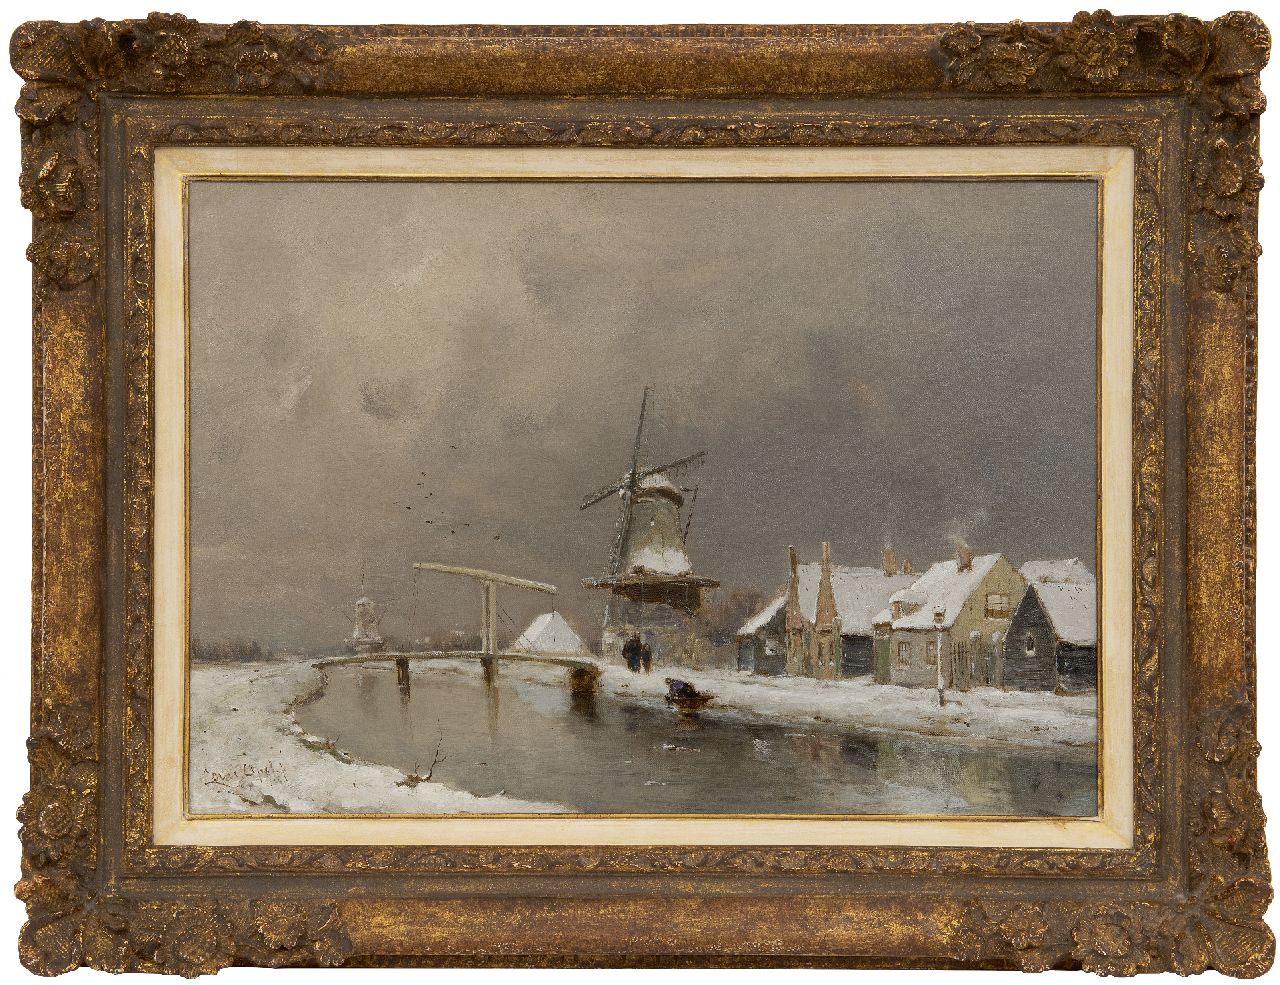 Apol L.F.H.  | Lodewijk Franciscus Hendrik 'Louis' Apol | Paintings offered for sale | Winter view of a village on a river, oil on canvas 35.3 x 50.2 cm, signed l.l.